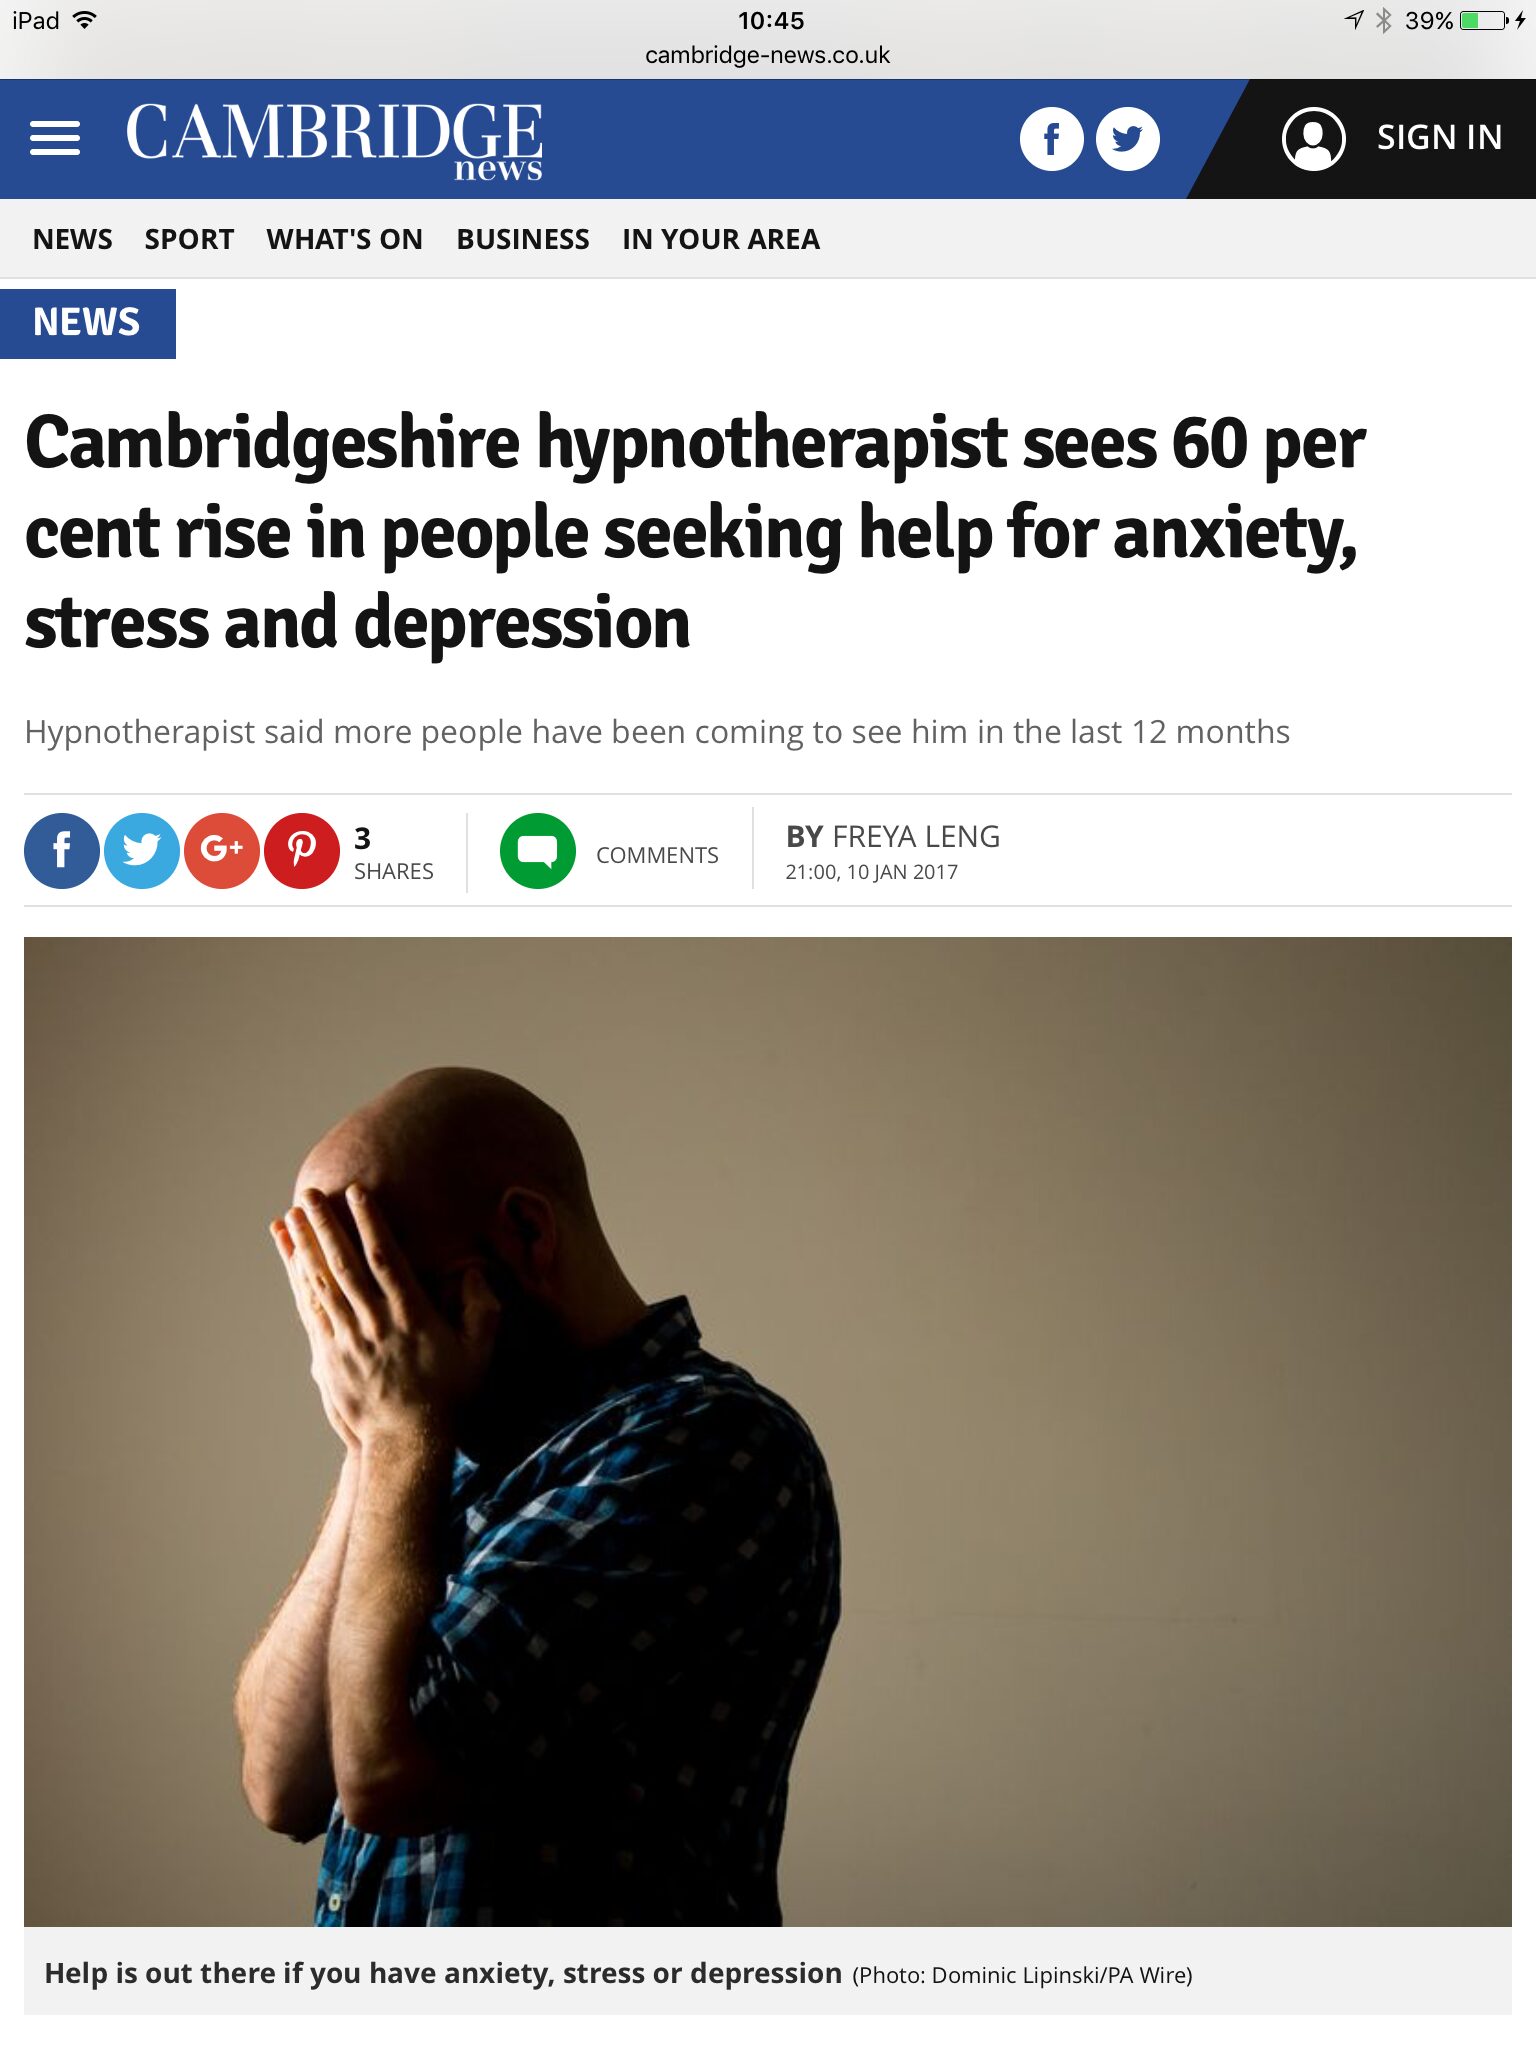 how to get help for anxiety stress depression cambridge news hypnotherapy in Ely